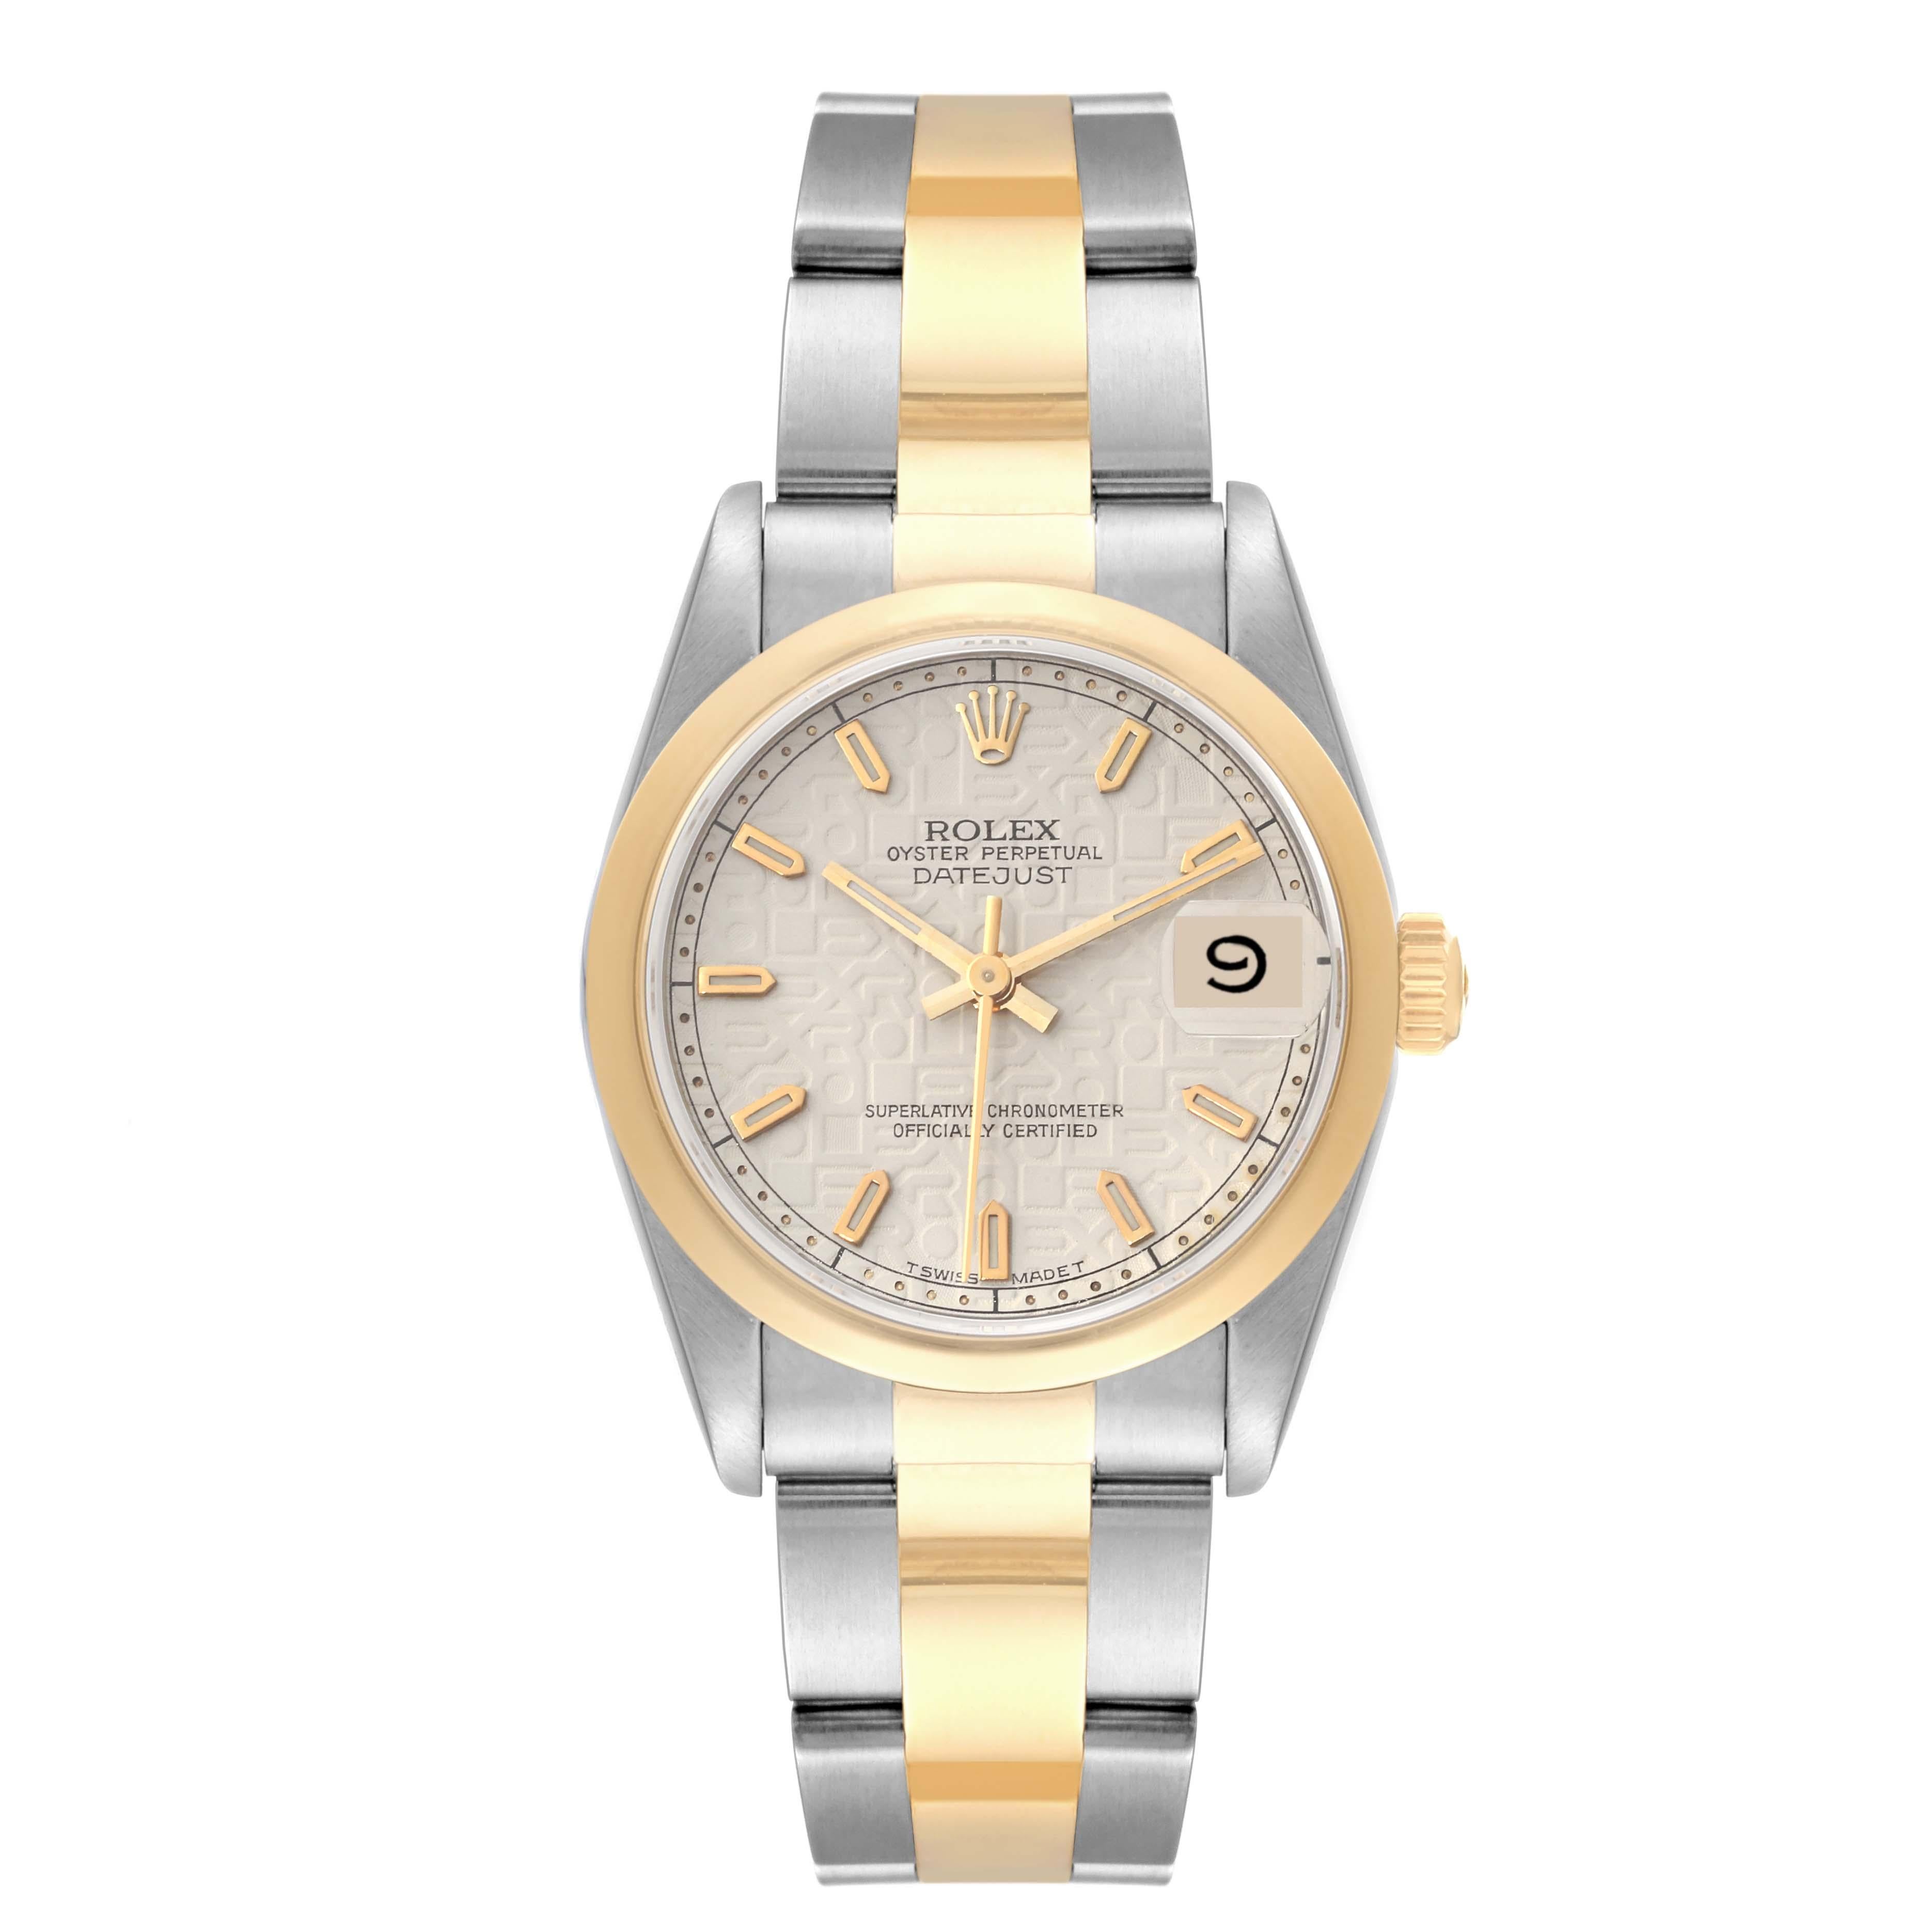 Rolex Datejust Midsize Steel Yellow Gold Anniversary Dial Ladies Watch 68243. Officially certified chronometer self-winding movement. Stainless steel oyster case 31 mm in diameter. Rolex logo on an 18K yellow gold crown. 18k yellow gold smooth